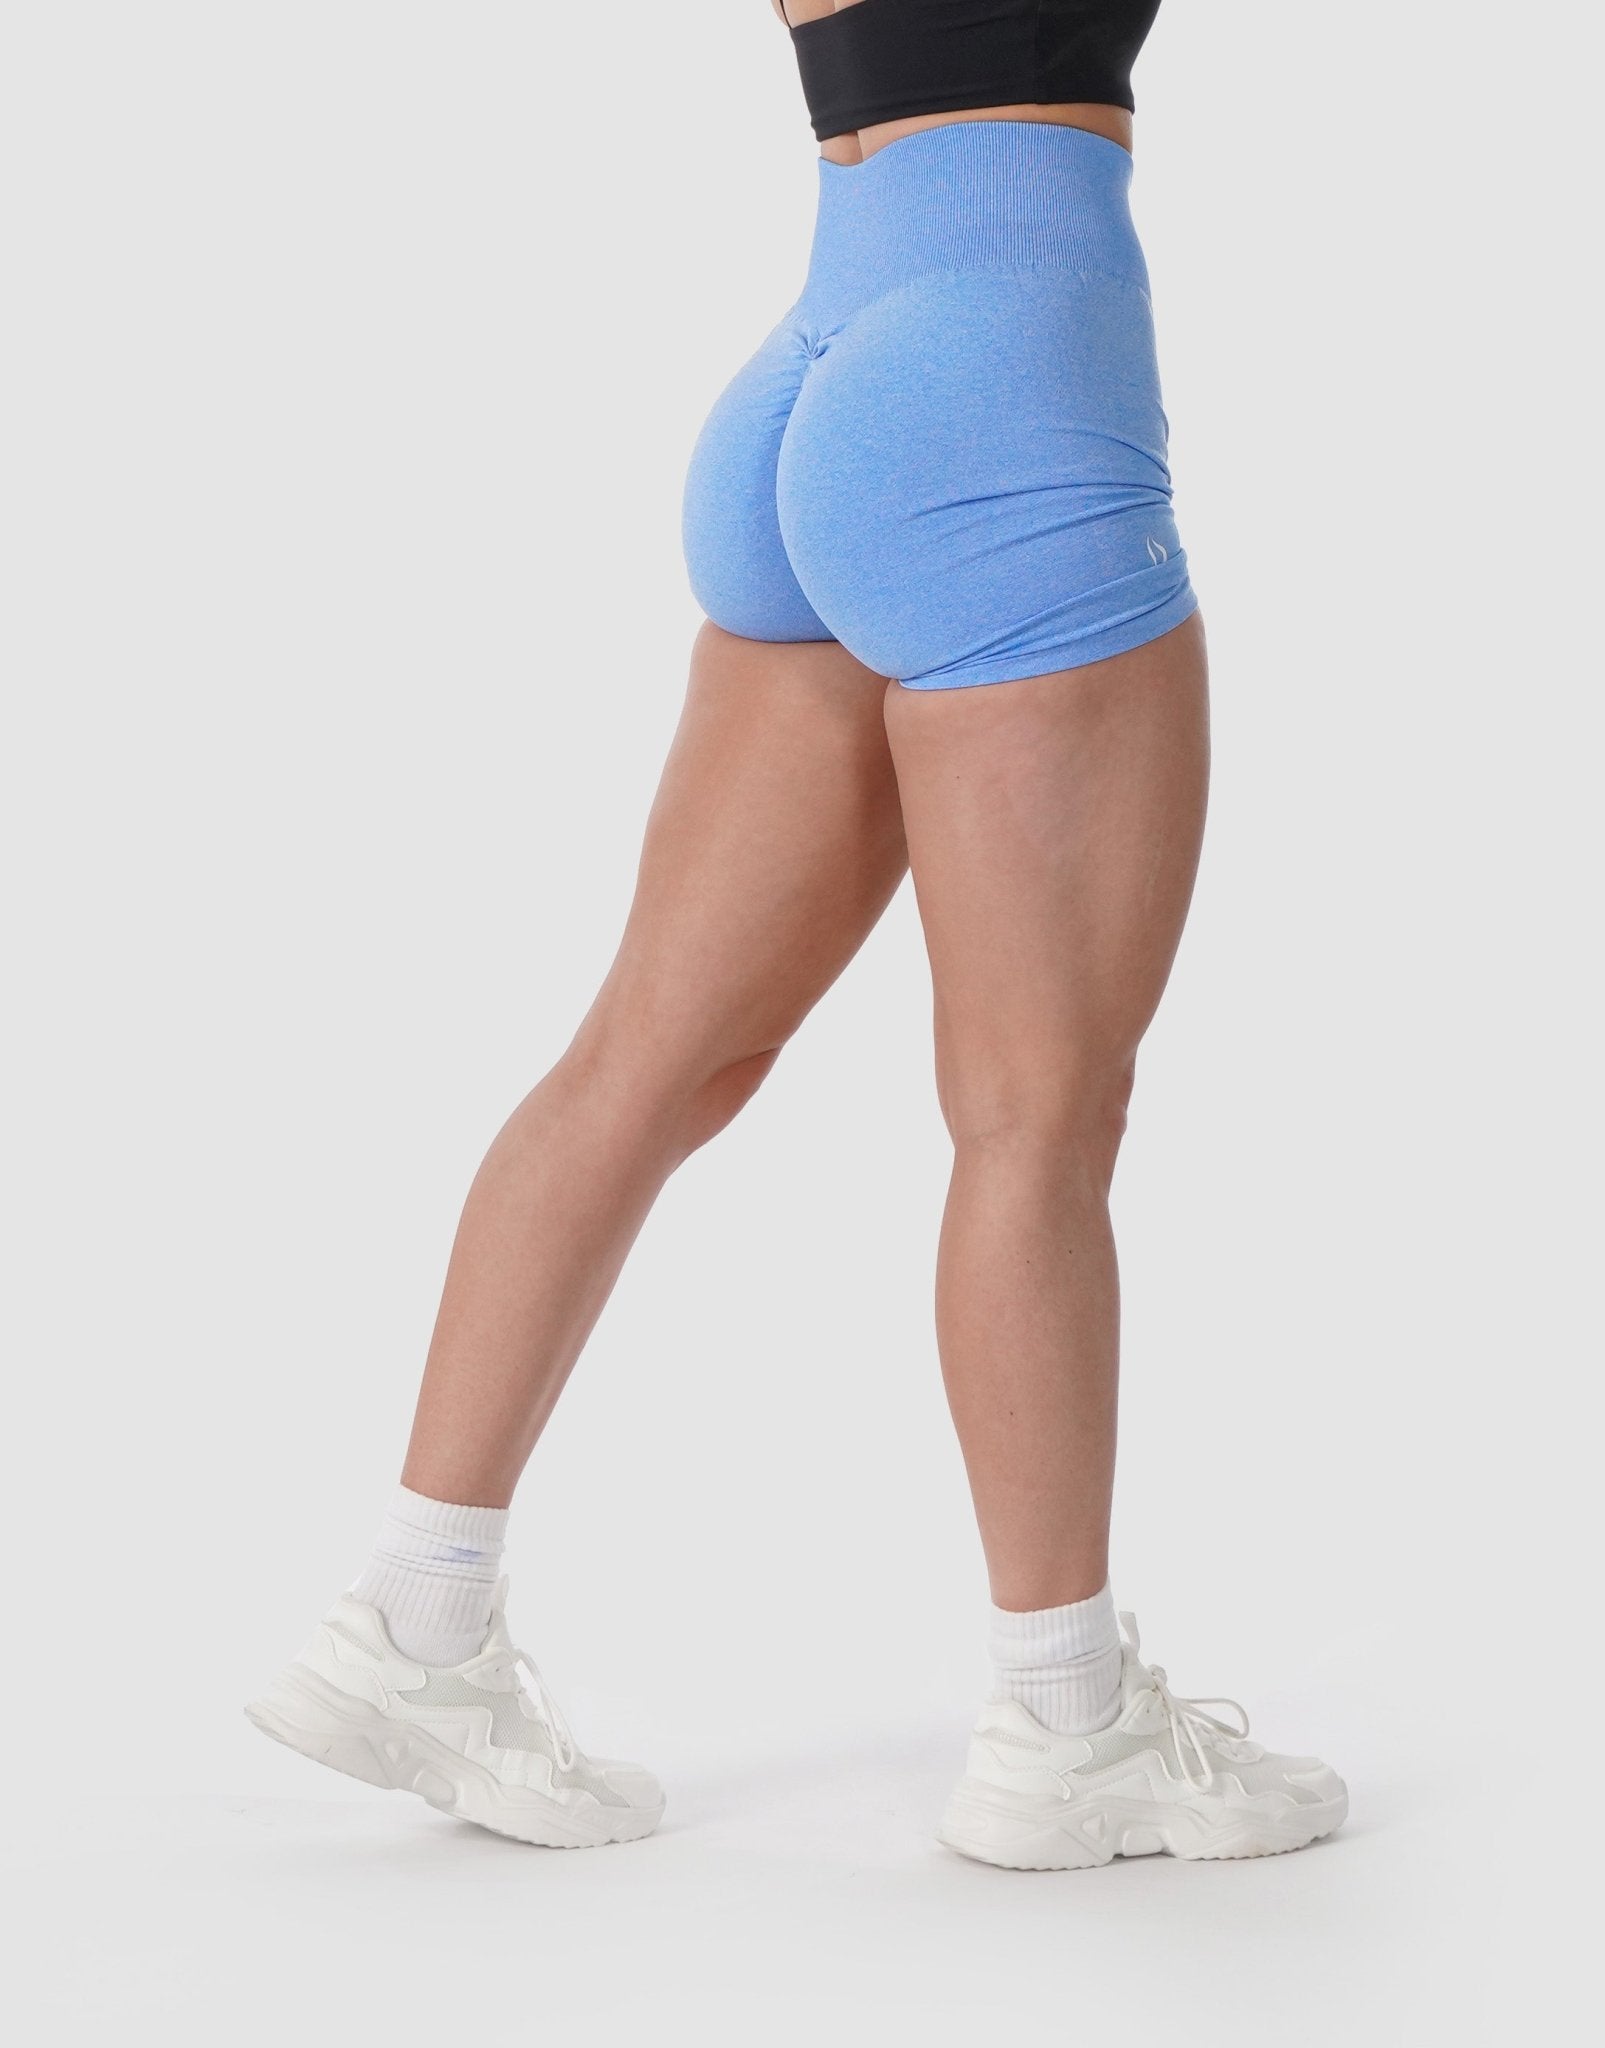 HIGH WAISTED LADIES BUTT SCRUNCH COMPRESSION SHORTS - SEXY YET SAVAGE  COLLECTION